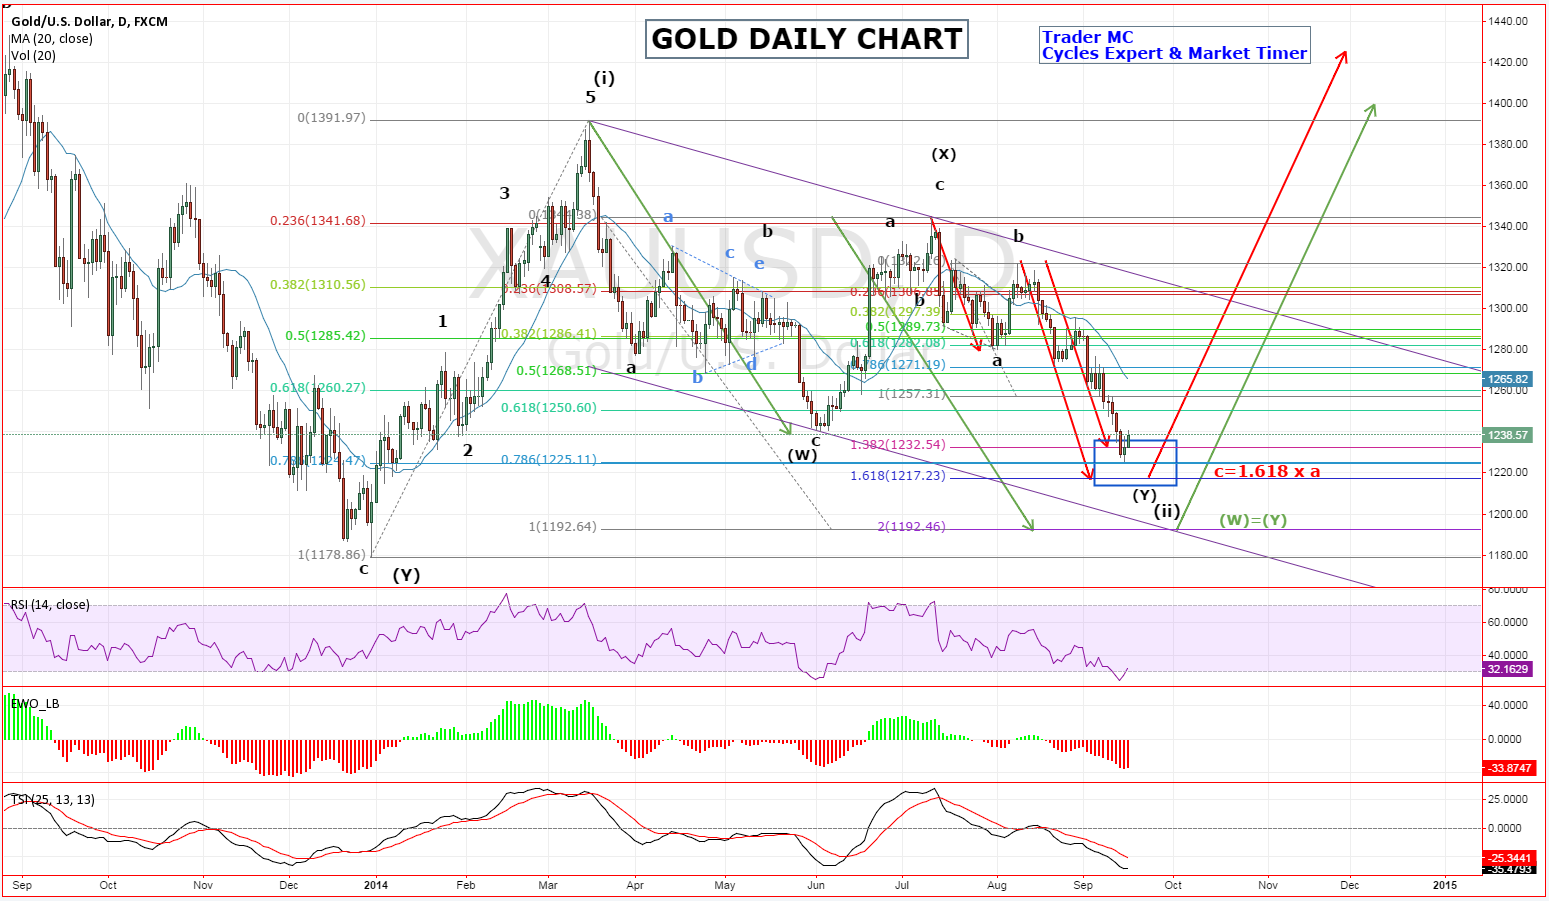 Gold: Daily Outlook